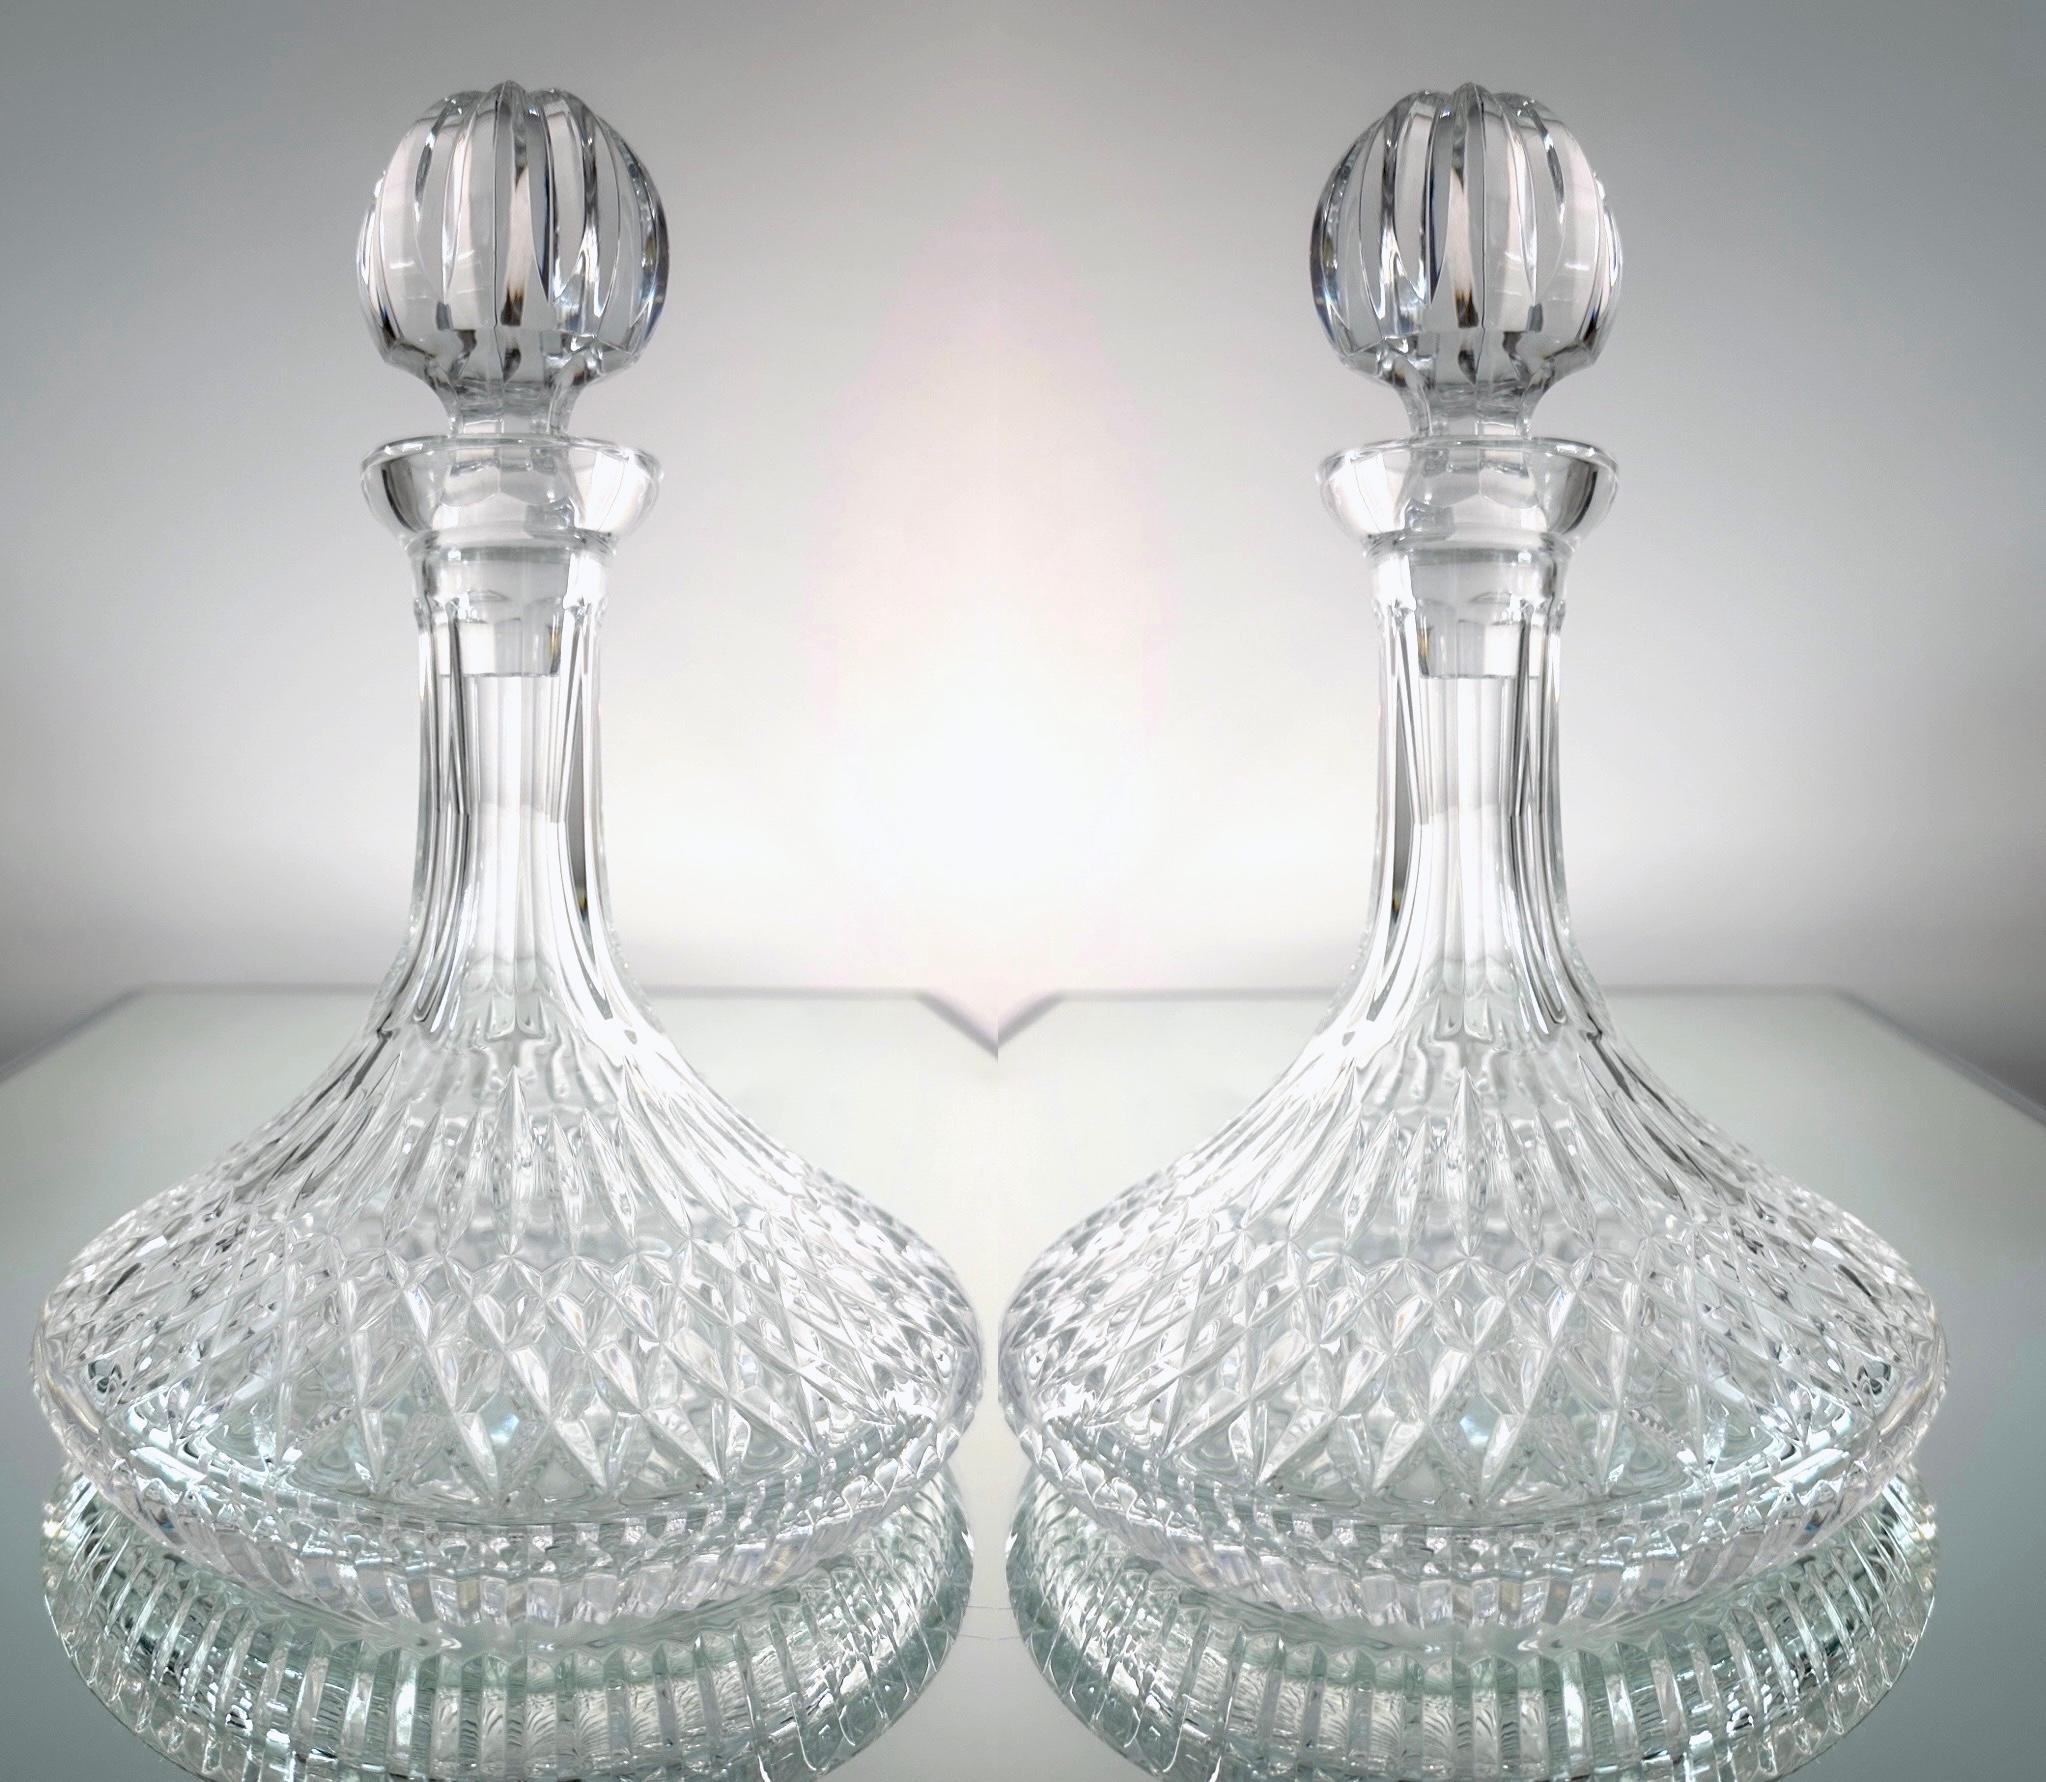 Pair of stunning vintage ships decanters by Waterford Crystal from the classic Lismore Series, first introduced in the early 1950's. Handcrafted and mouth-blown lead crystal featuring brilliant prismatic diamond cuts with etched designs throughout.